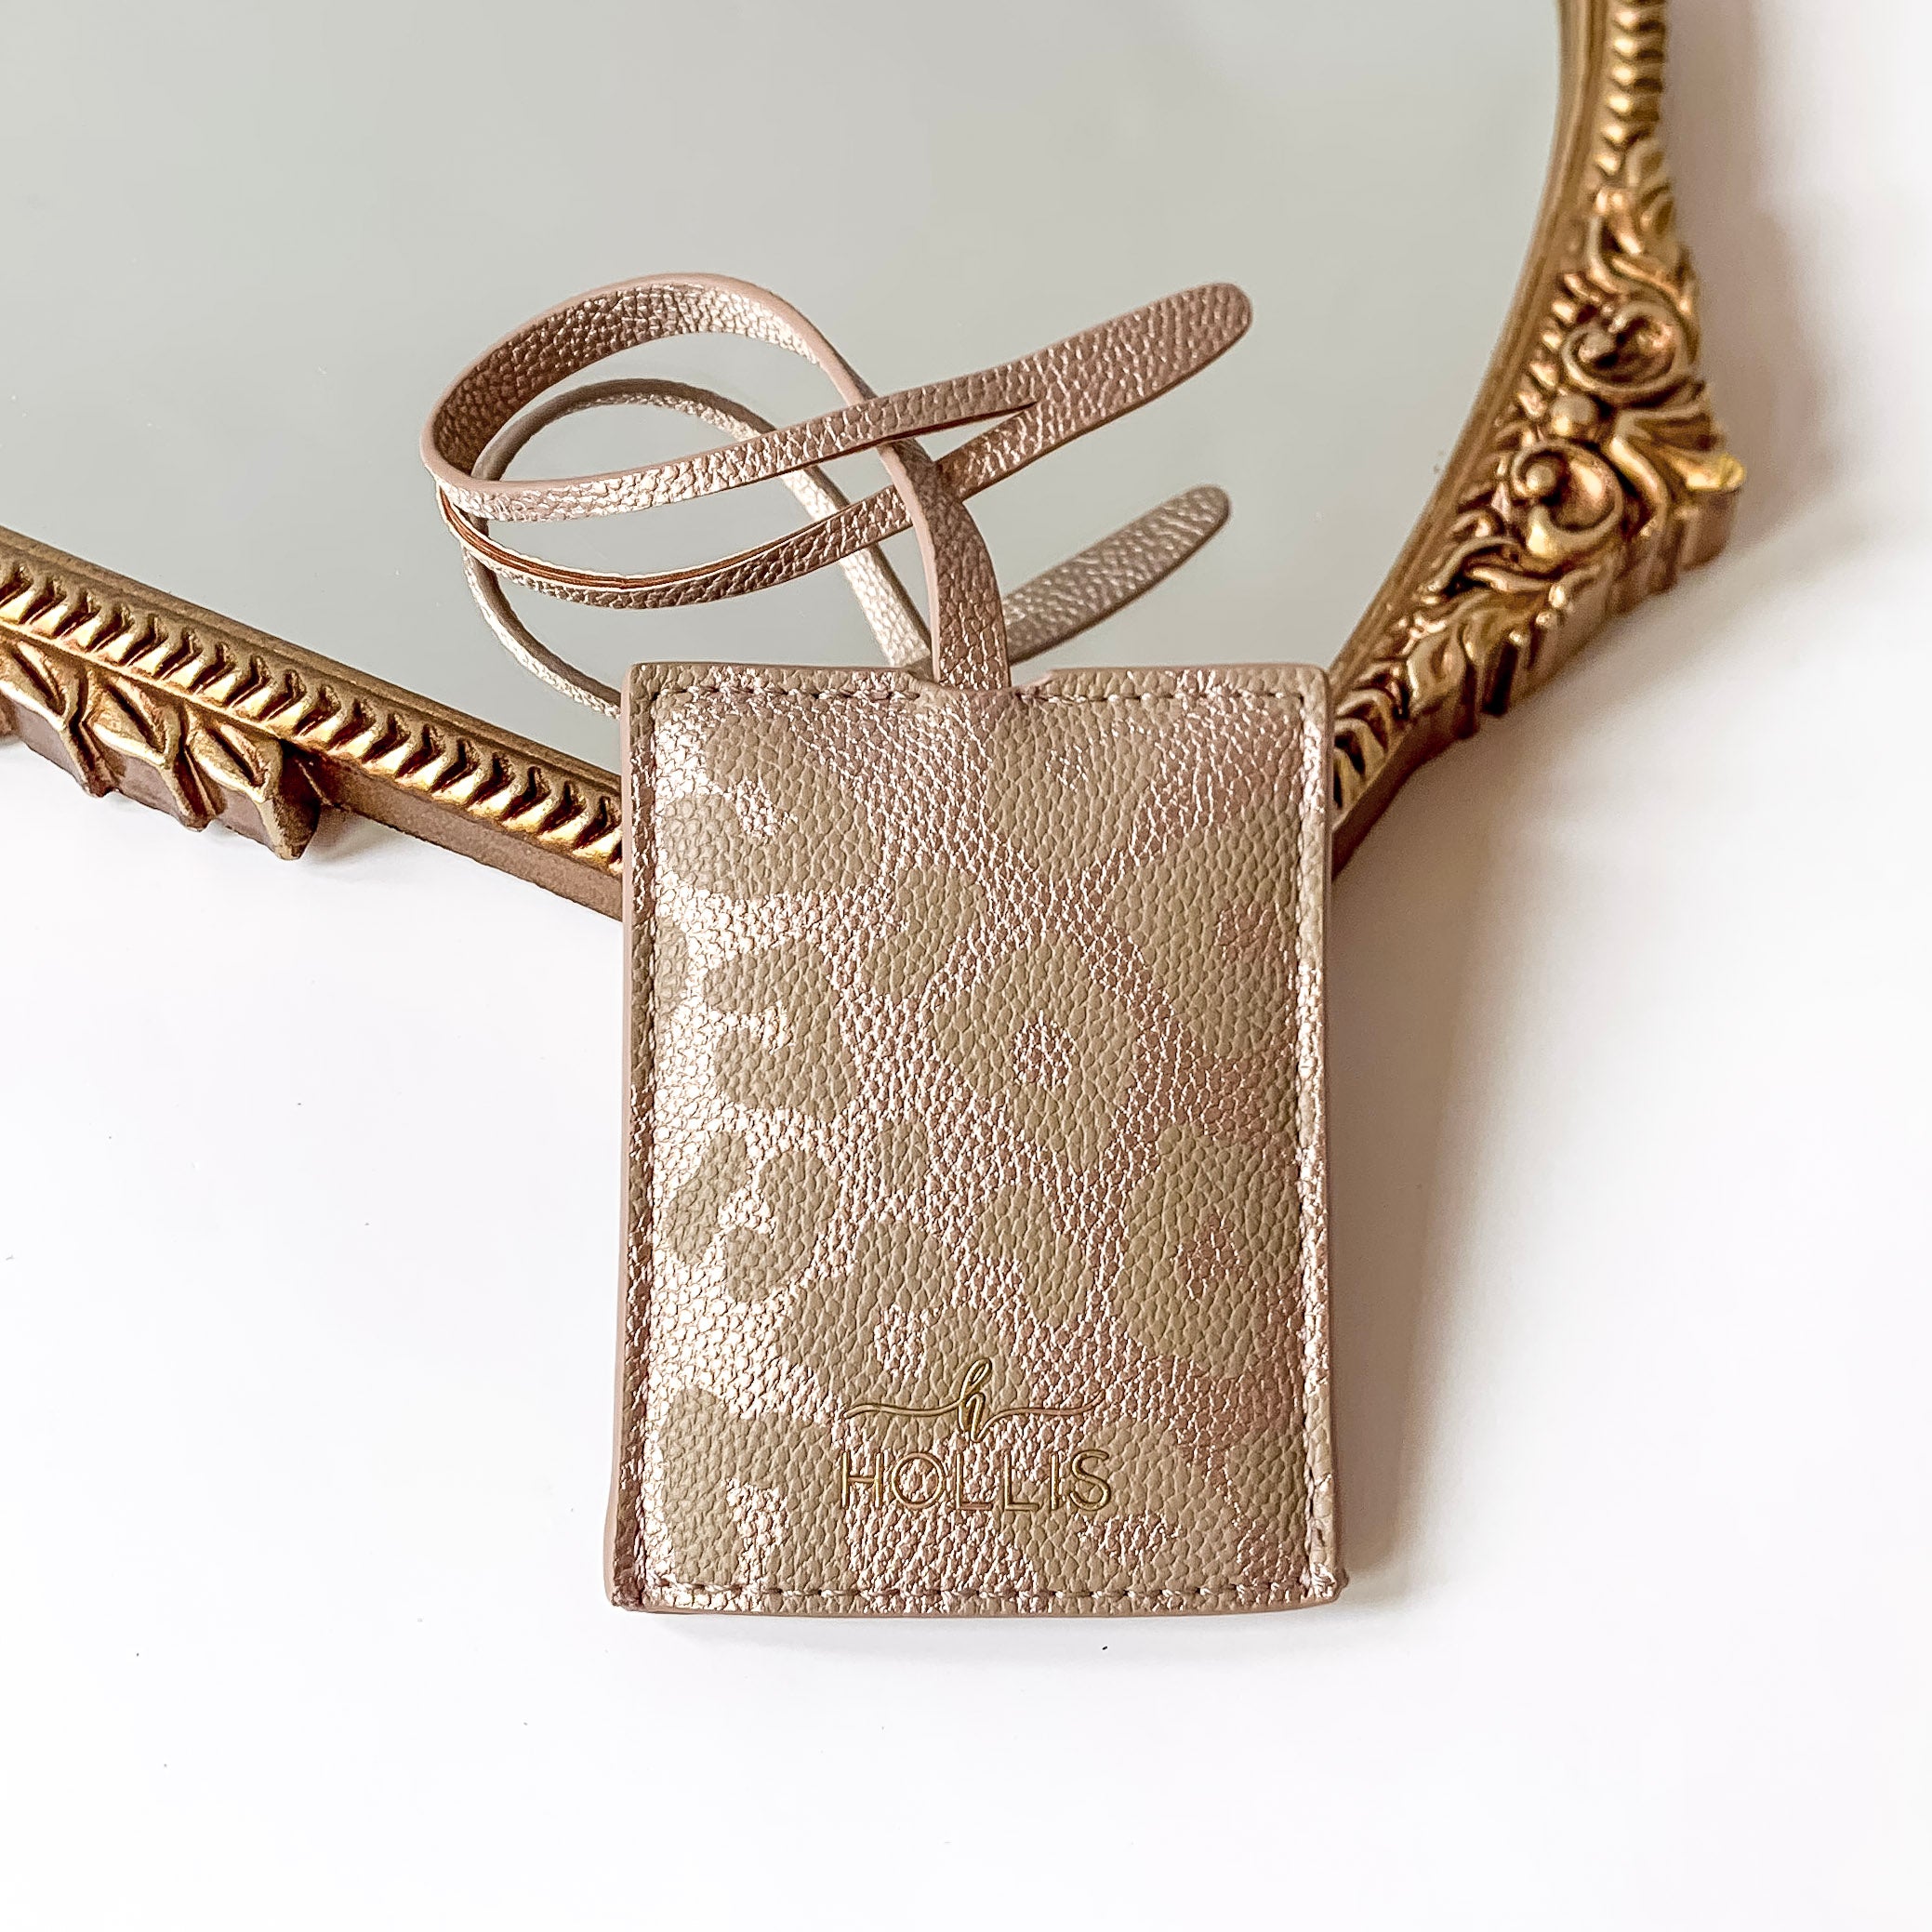 Leopard print luggage tag with a gold HOLLIS emblem at the bottom. This is pictured laying partially on a gold mirror on a white background.